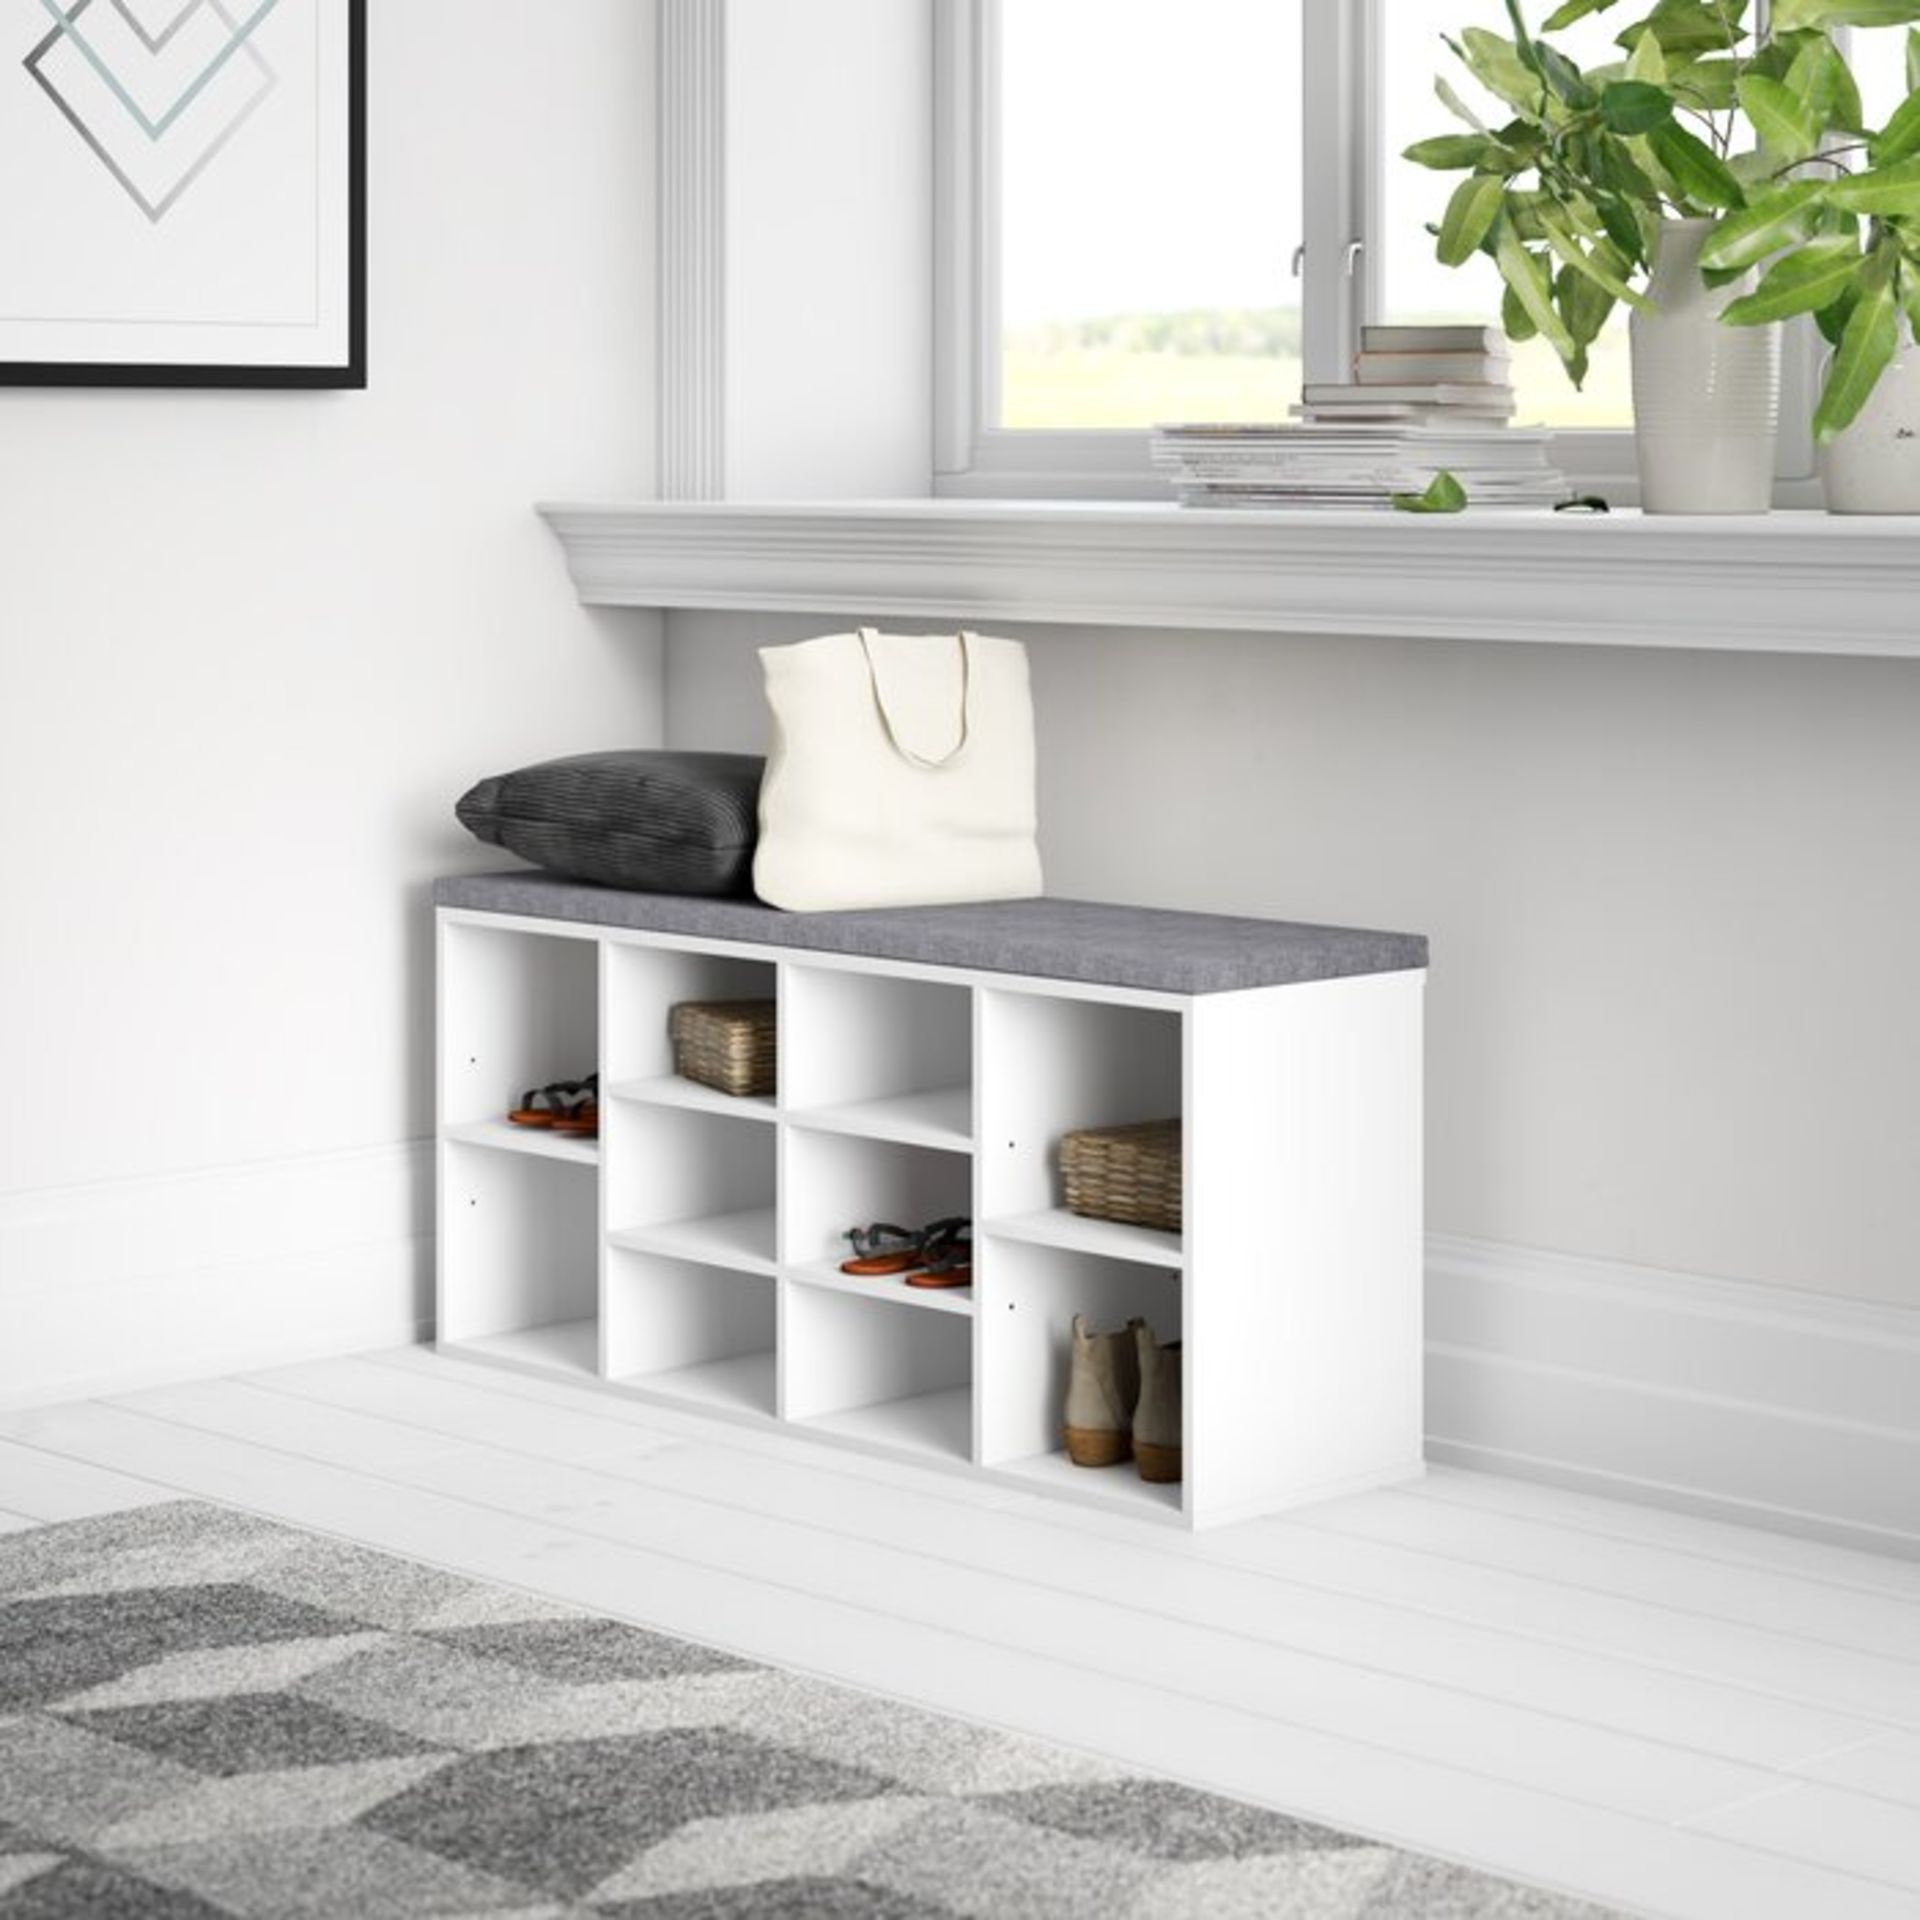 Shoes Storage Bench - RRP £65.99 - Image 2 of 3